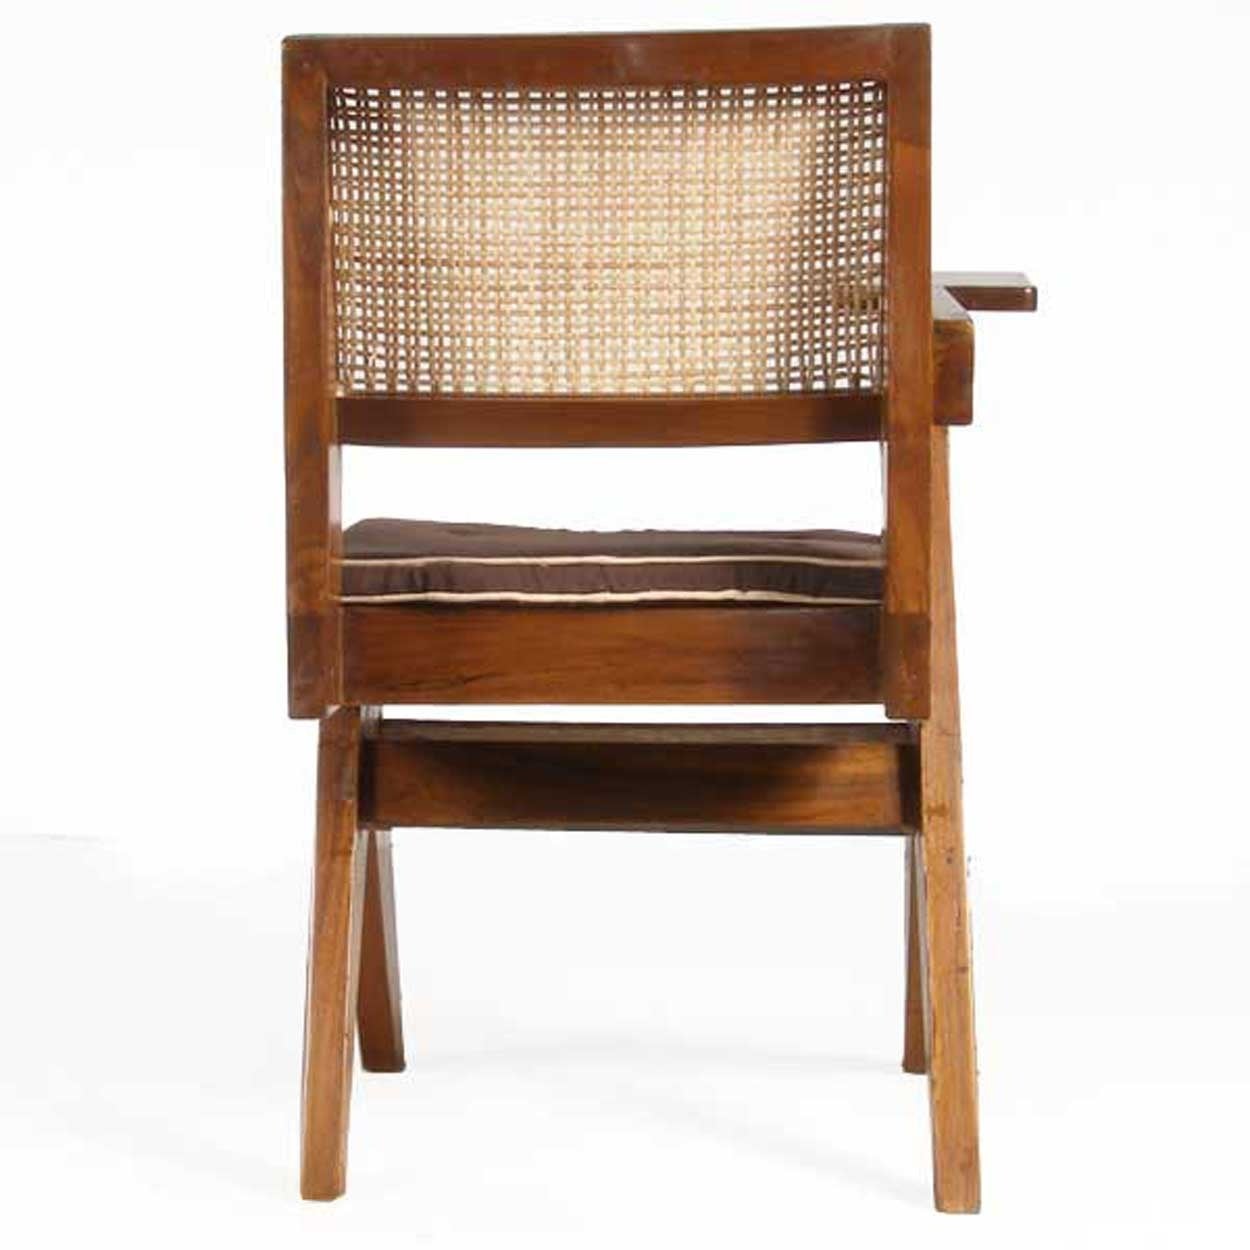 Indian Pierre Jeanneret Caned Teak Class Chair from Chandigarh, India For Sale